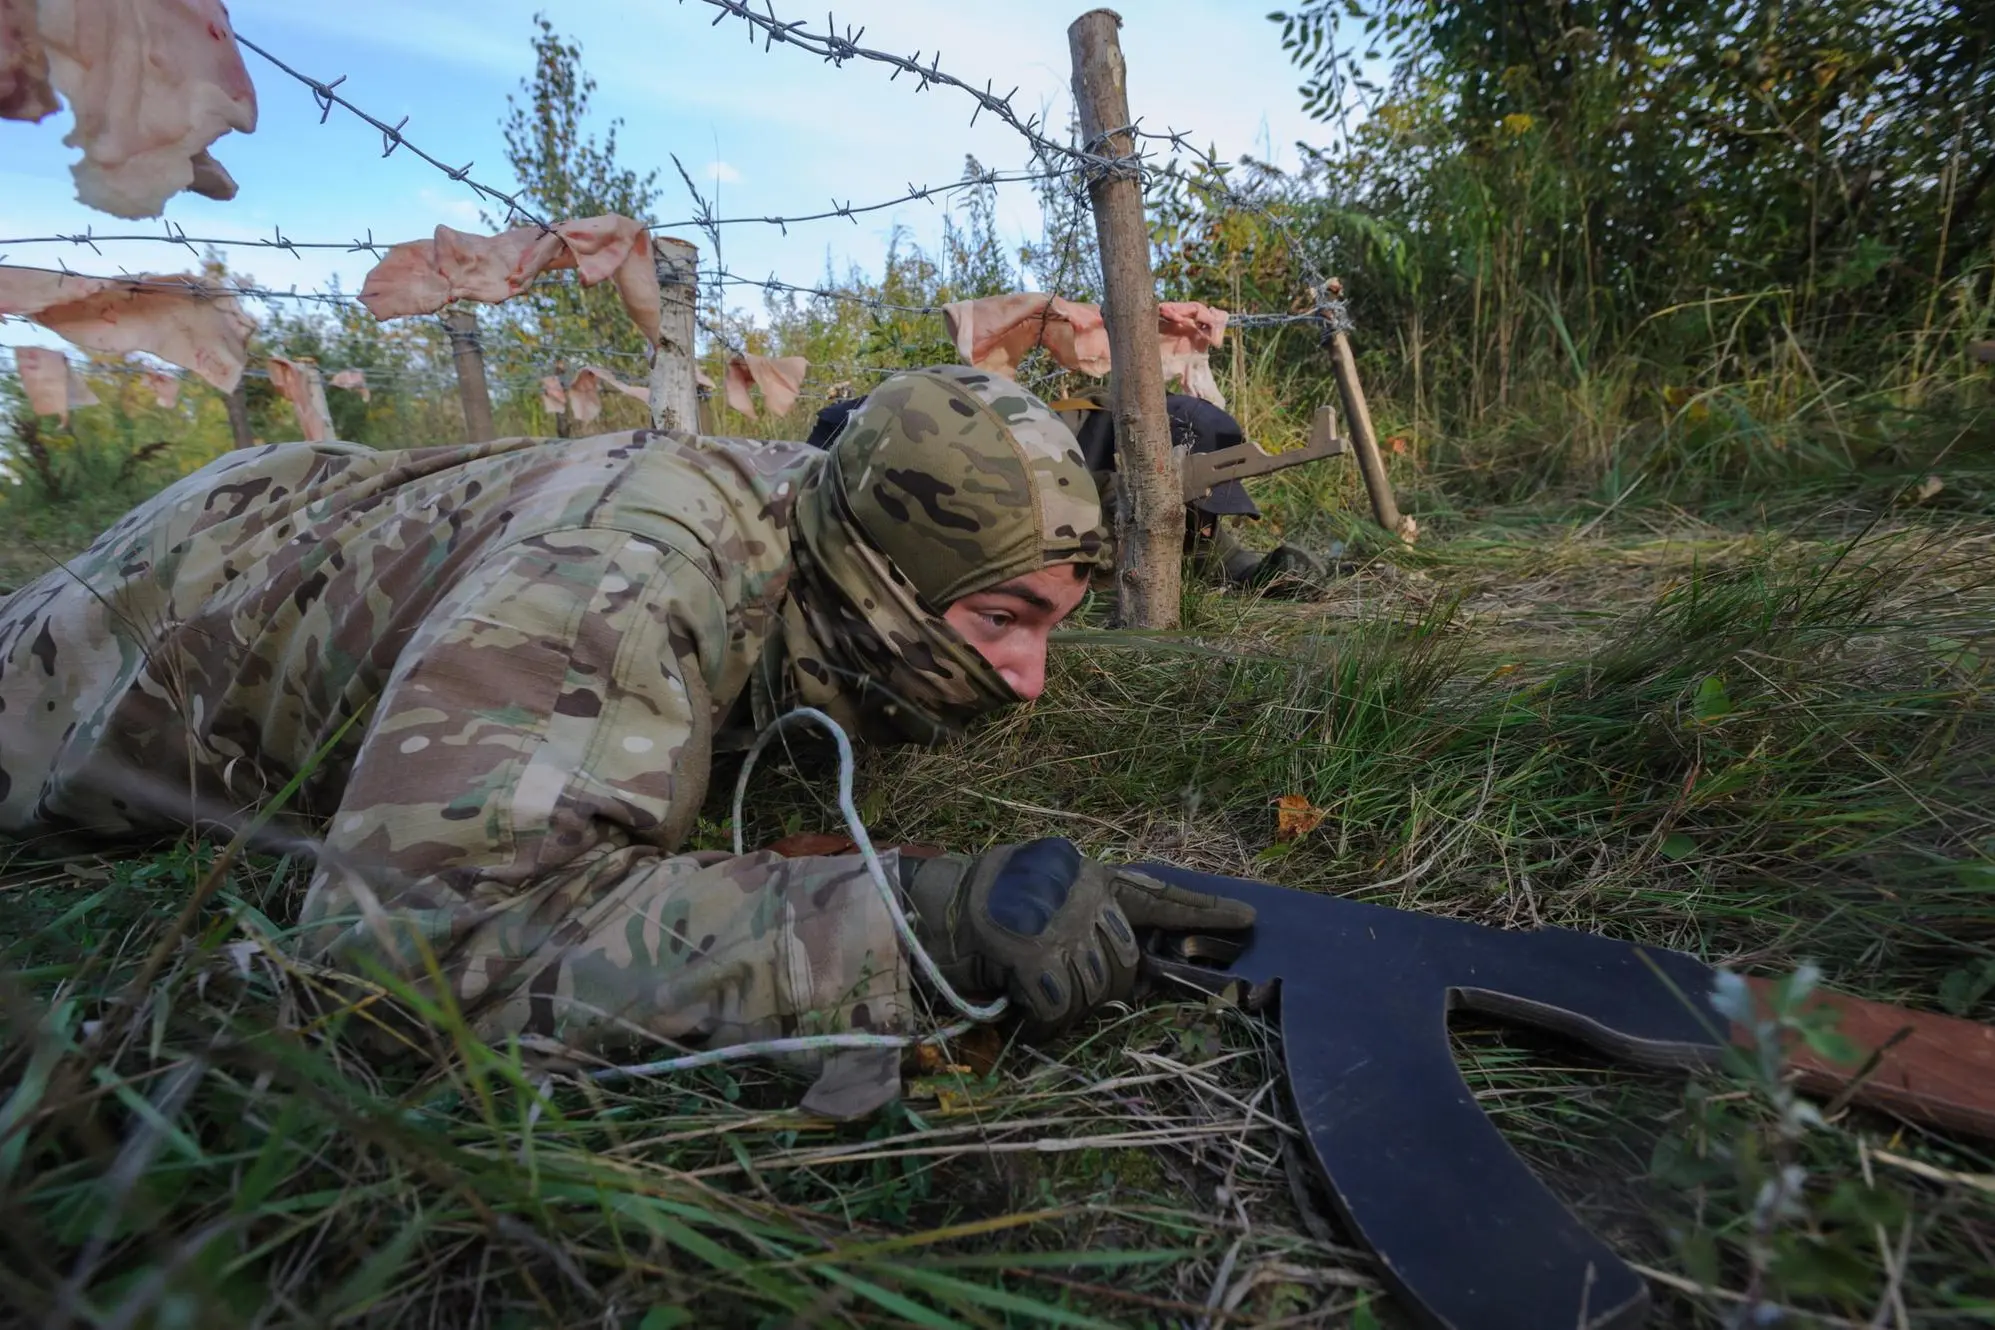 epaselect epa10204506 A civilian holding a wooden replica of a rifle crawls under barbed wire during military training organized by the Ukrainian political organization Right Sector, in the Lviv region, western Ukraine, 24 September 2022. Forty-five civilians took part in a three-day military training in the Lviv region. Russian troops entered Ukraine on 24 February 2022 starting a conflict that has provoked destruction and a humanitarian crisis. EPA/MYKOLA TYS